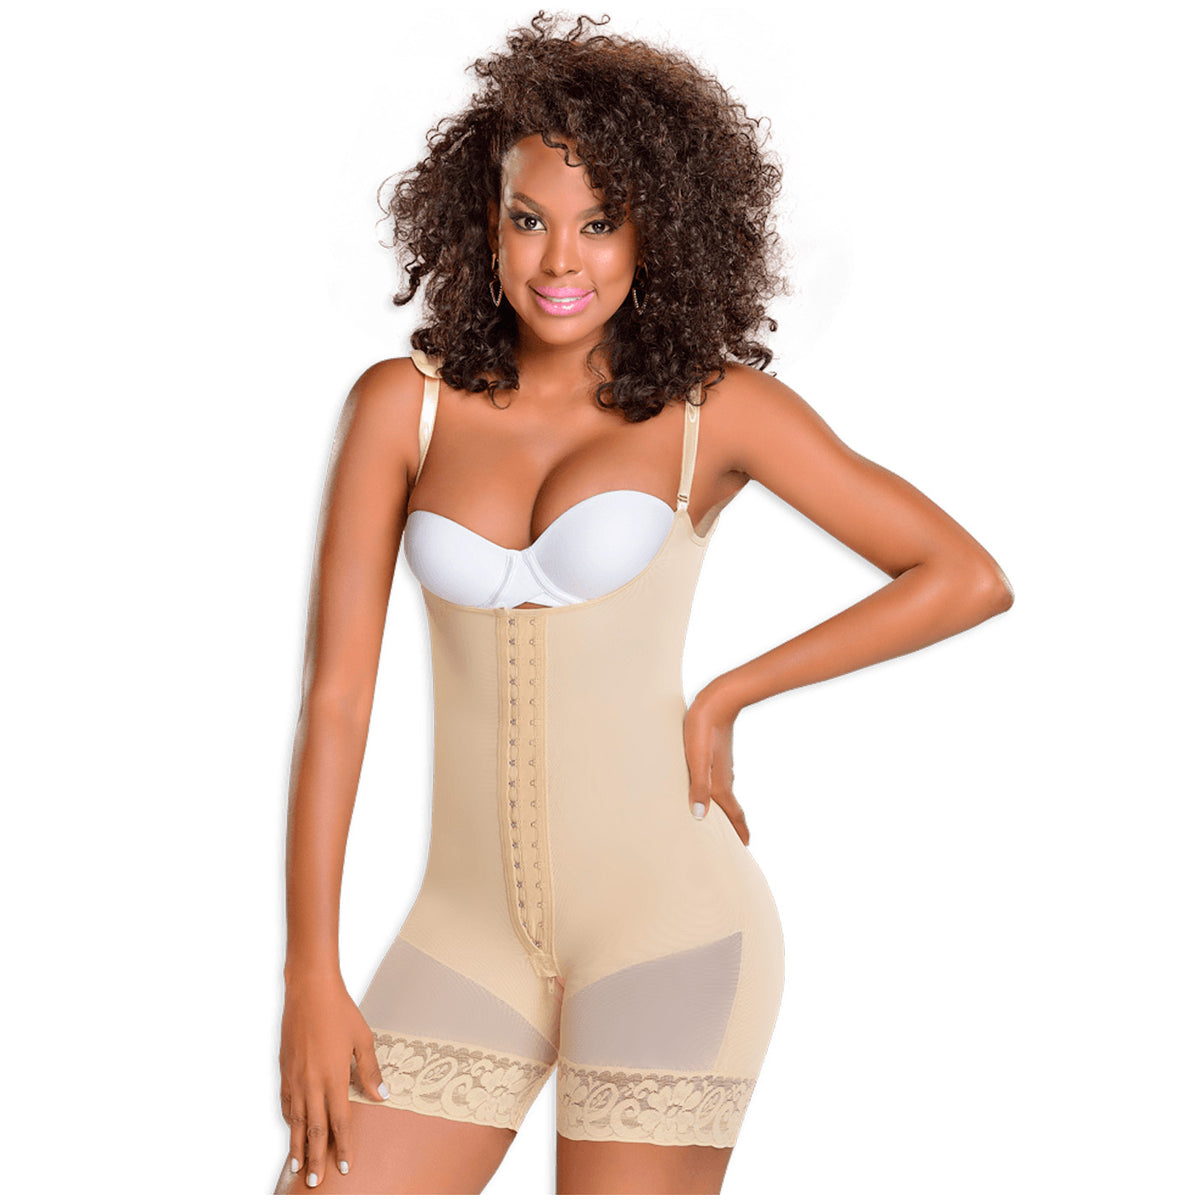 Other  Sonryse Fajas Colimbianas High Compression Shapers L36